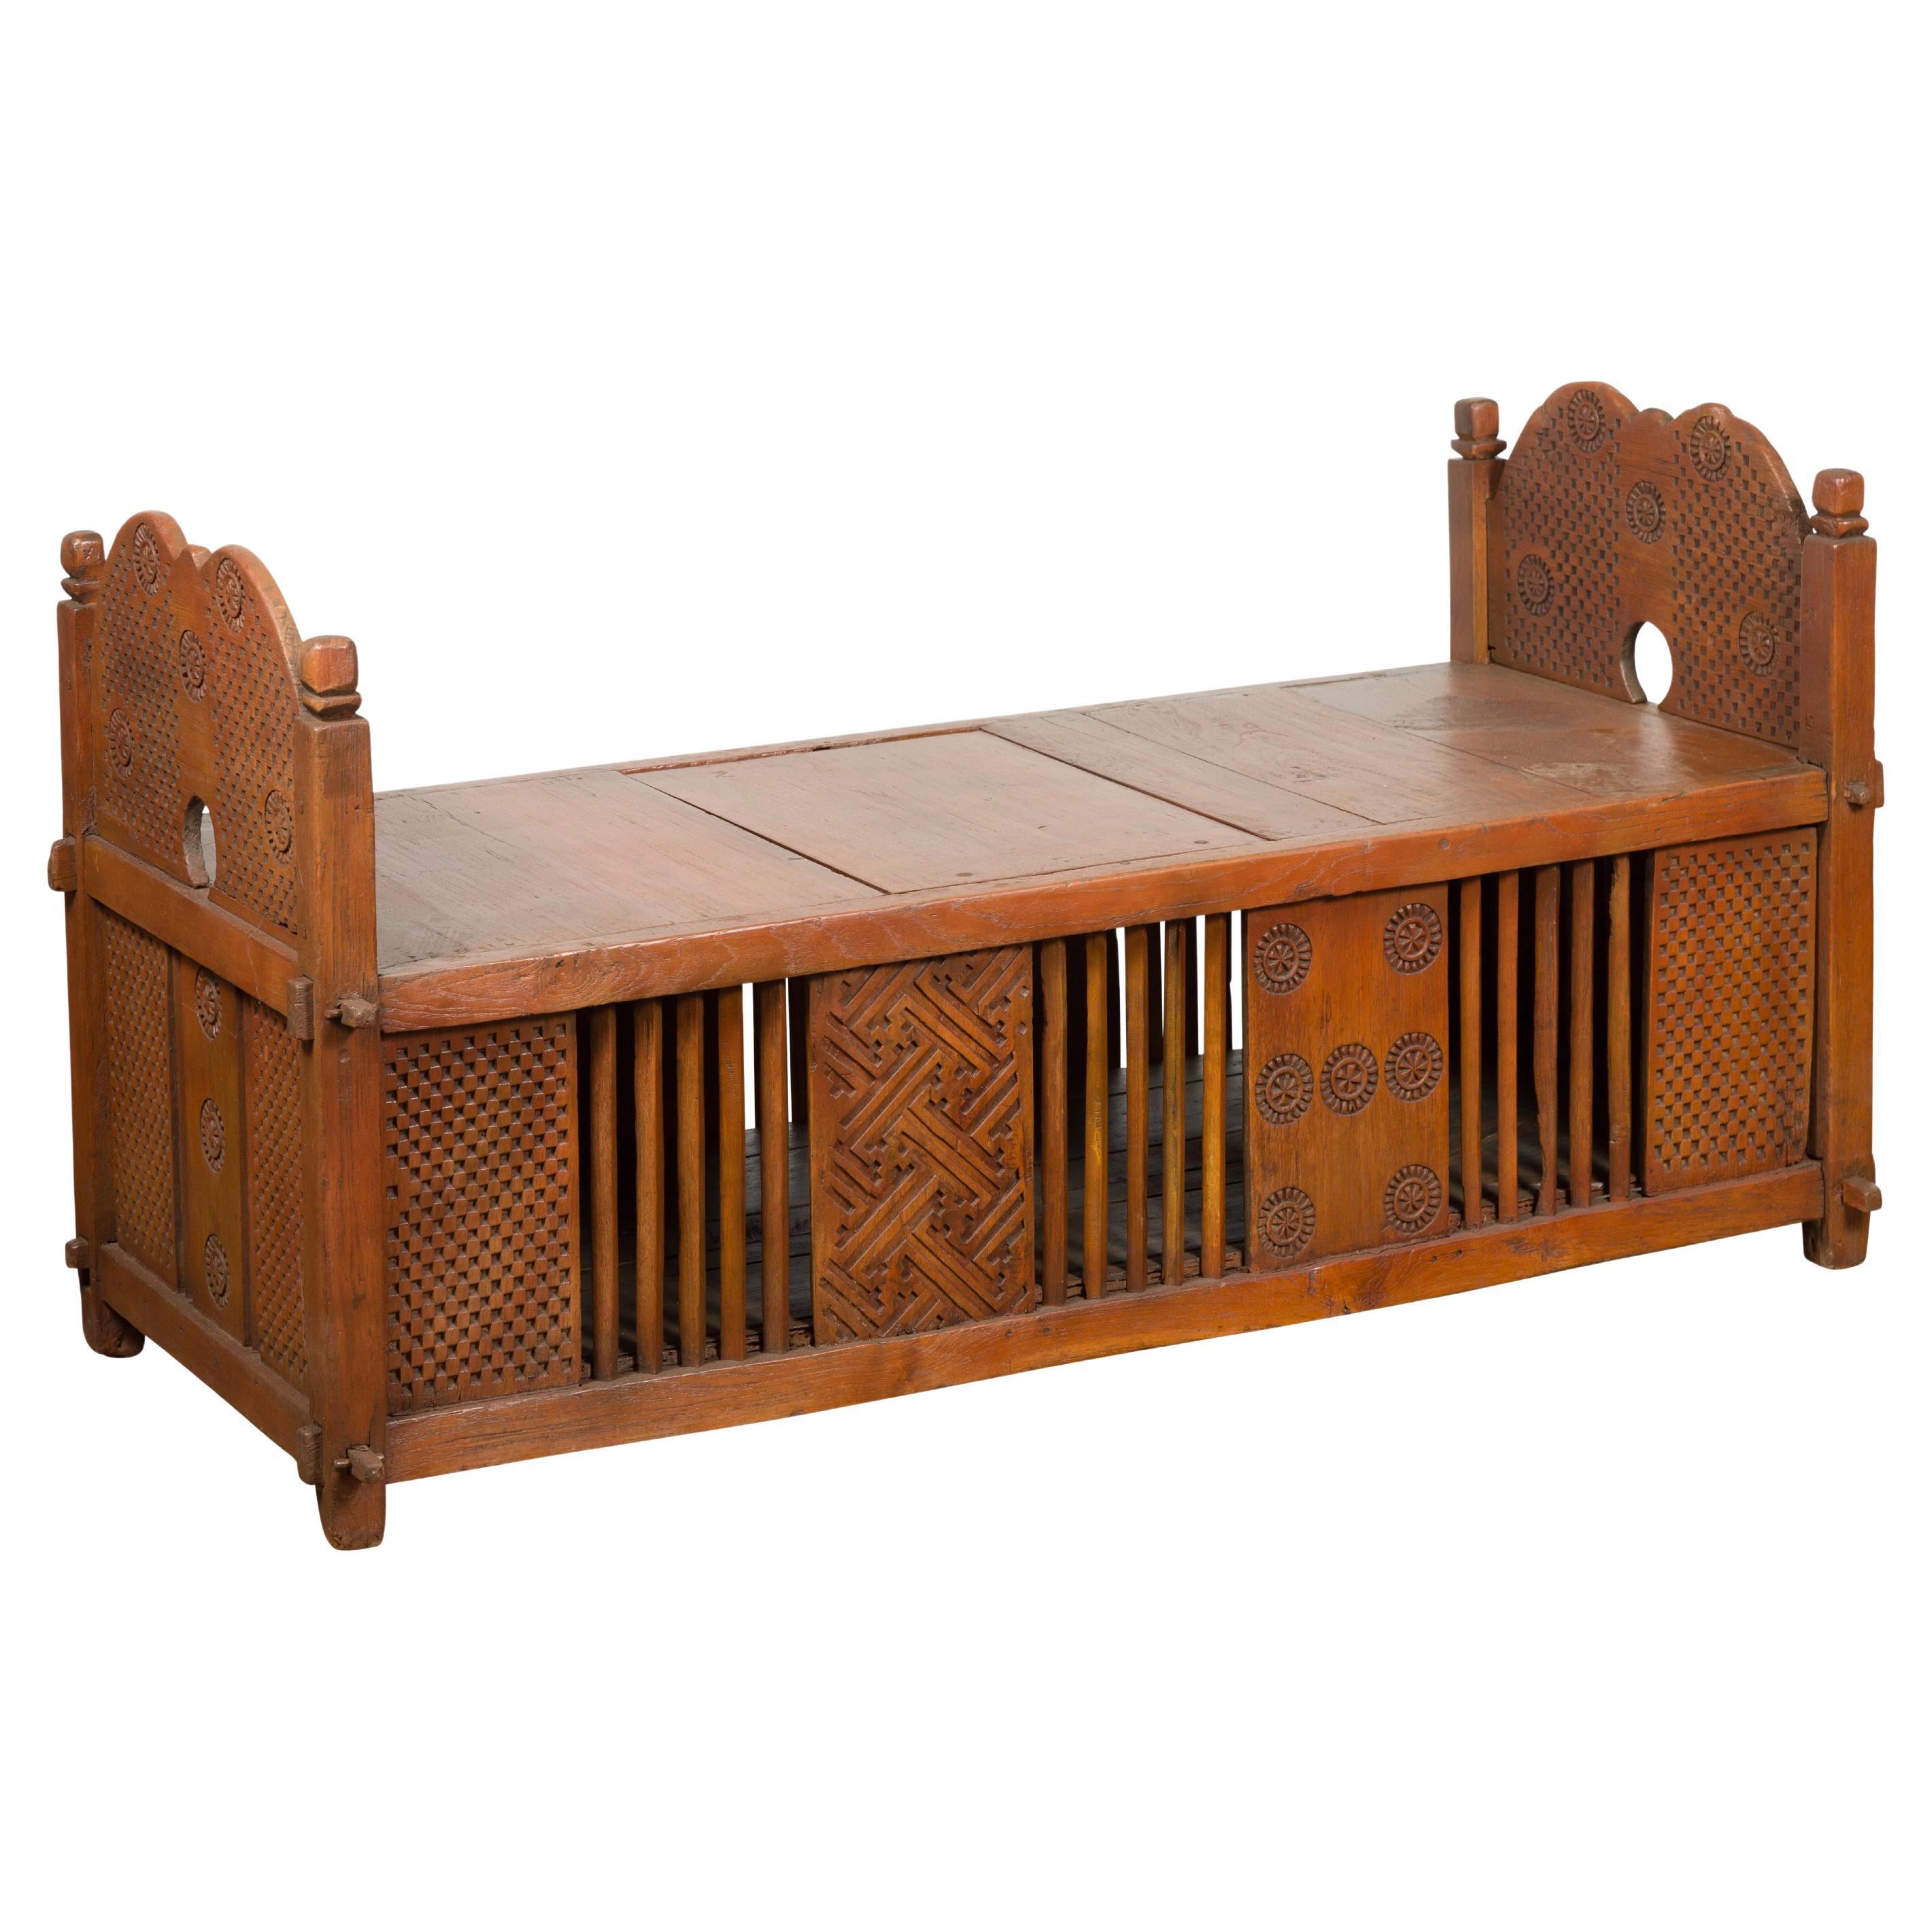 Antique Window Bench with Internal Storage For Sale